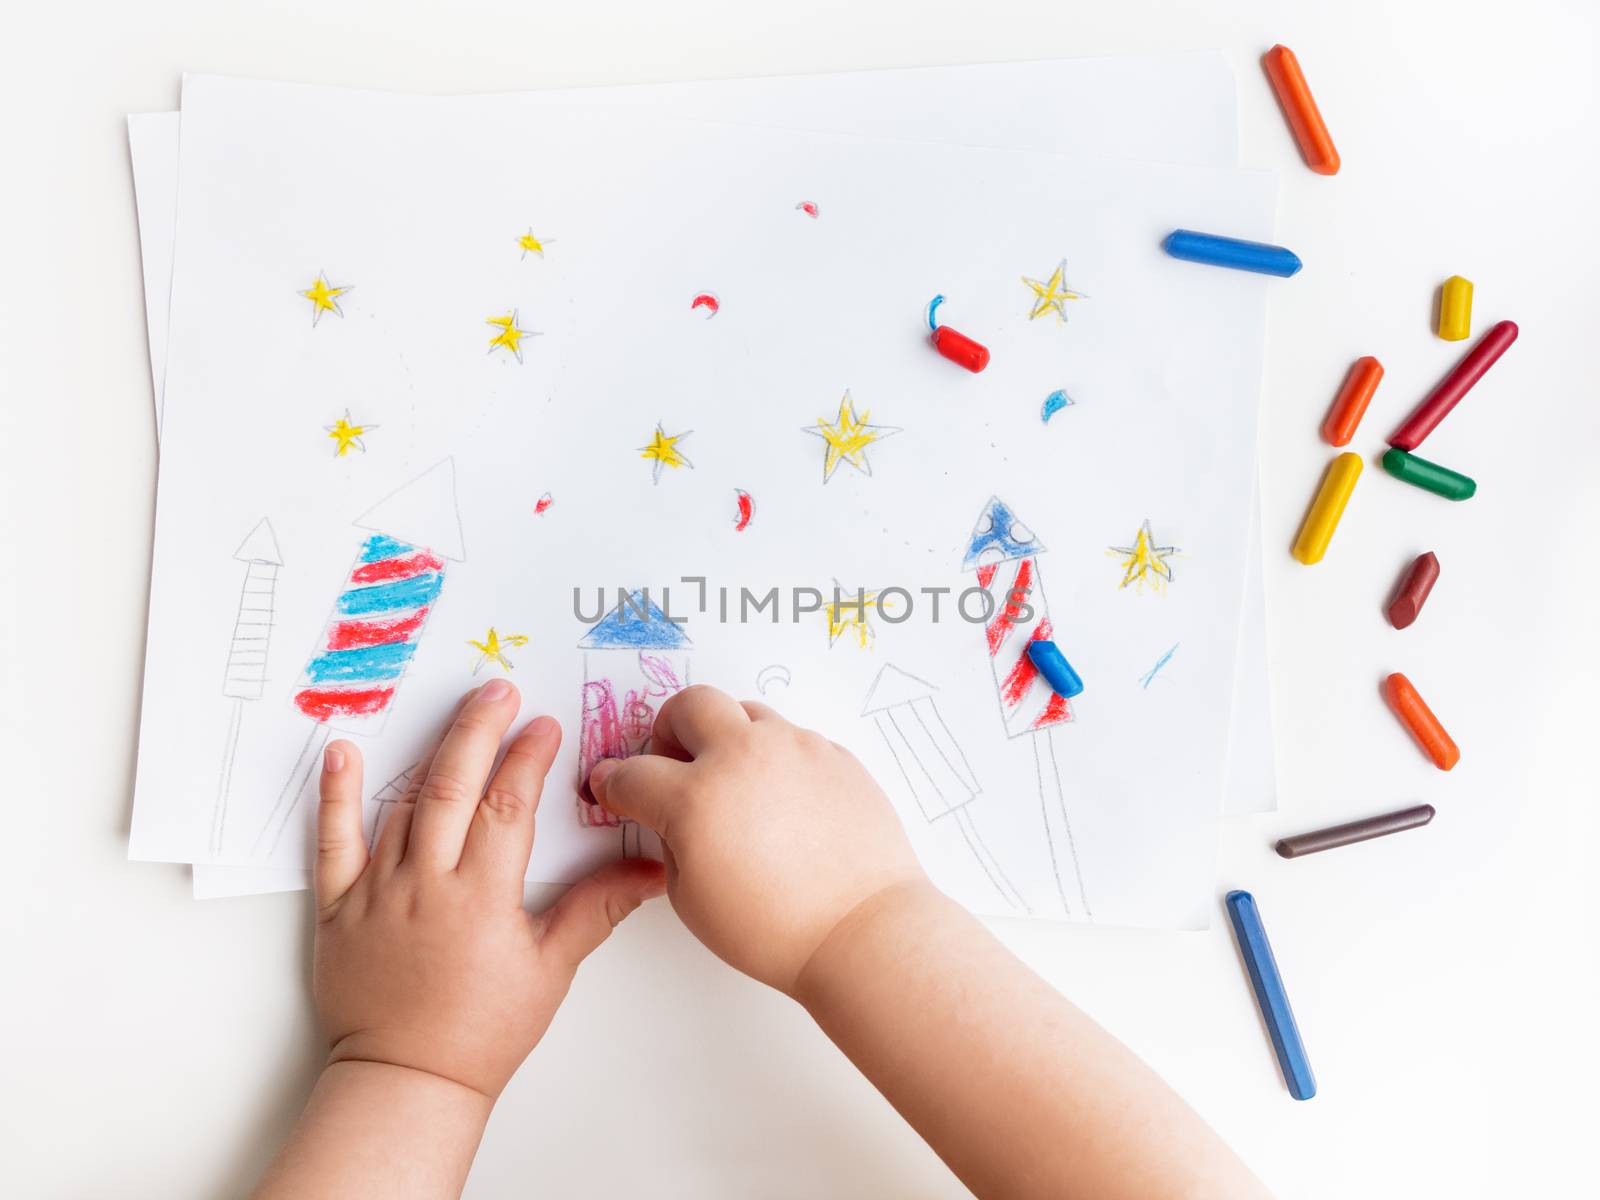 Toddler sits on windowsill and draws colorful fireworks. Child's by aksenovko